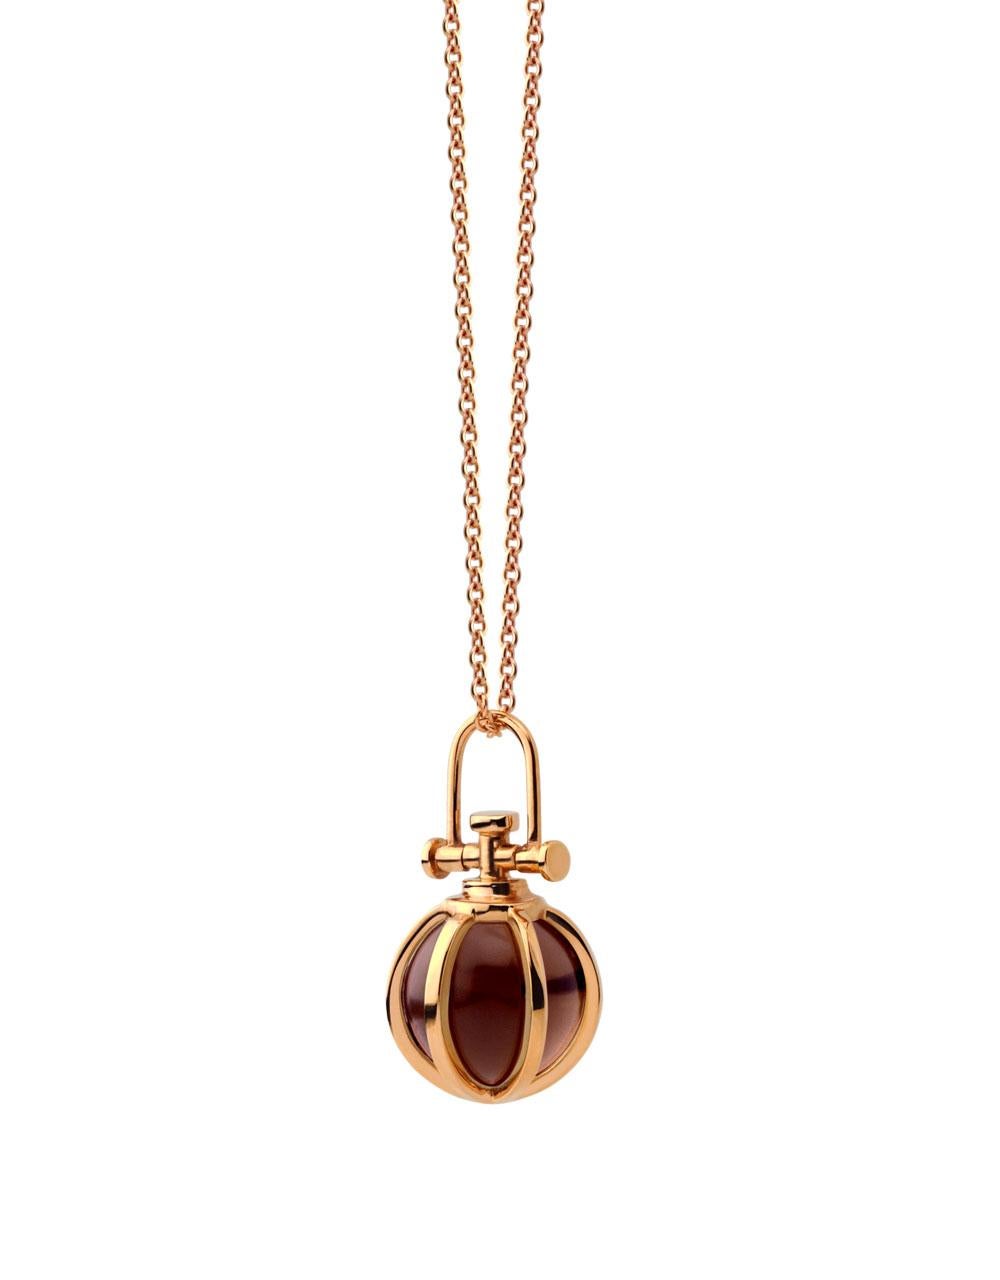 Rebecca Li designs mindfulness. 
This dainty orb necklace is from her Crystal Ball Collection.
Smoky quartz means Protection & Luck.

Pendant:
Metal Type: 18K Rose Gold
Gemstone: Smoky Quartz
Pendant Size: 9 mm W * 9 mm D * 17 mm H
Gemstone Size: 8